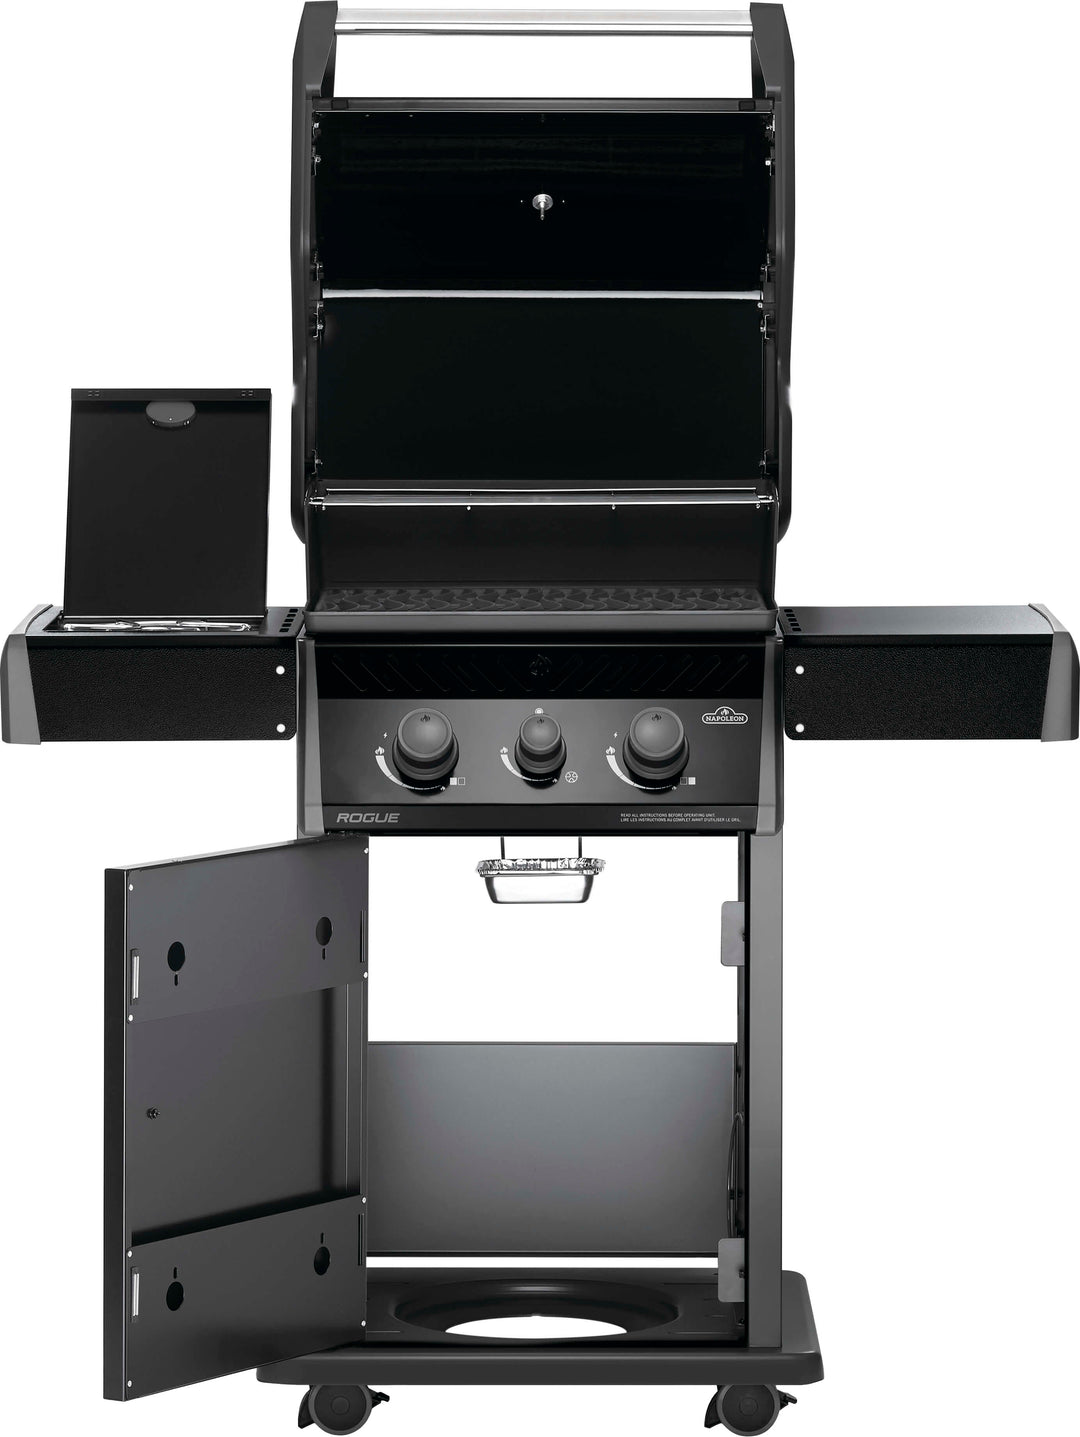 Napoleon - Rogue 365 Propane Gas Grill with Side Burner - Black_7